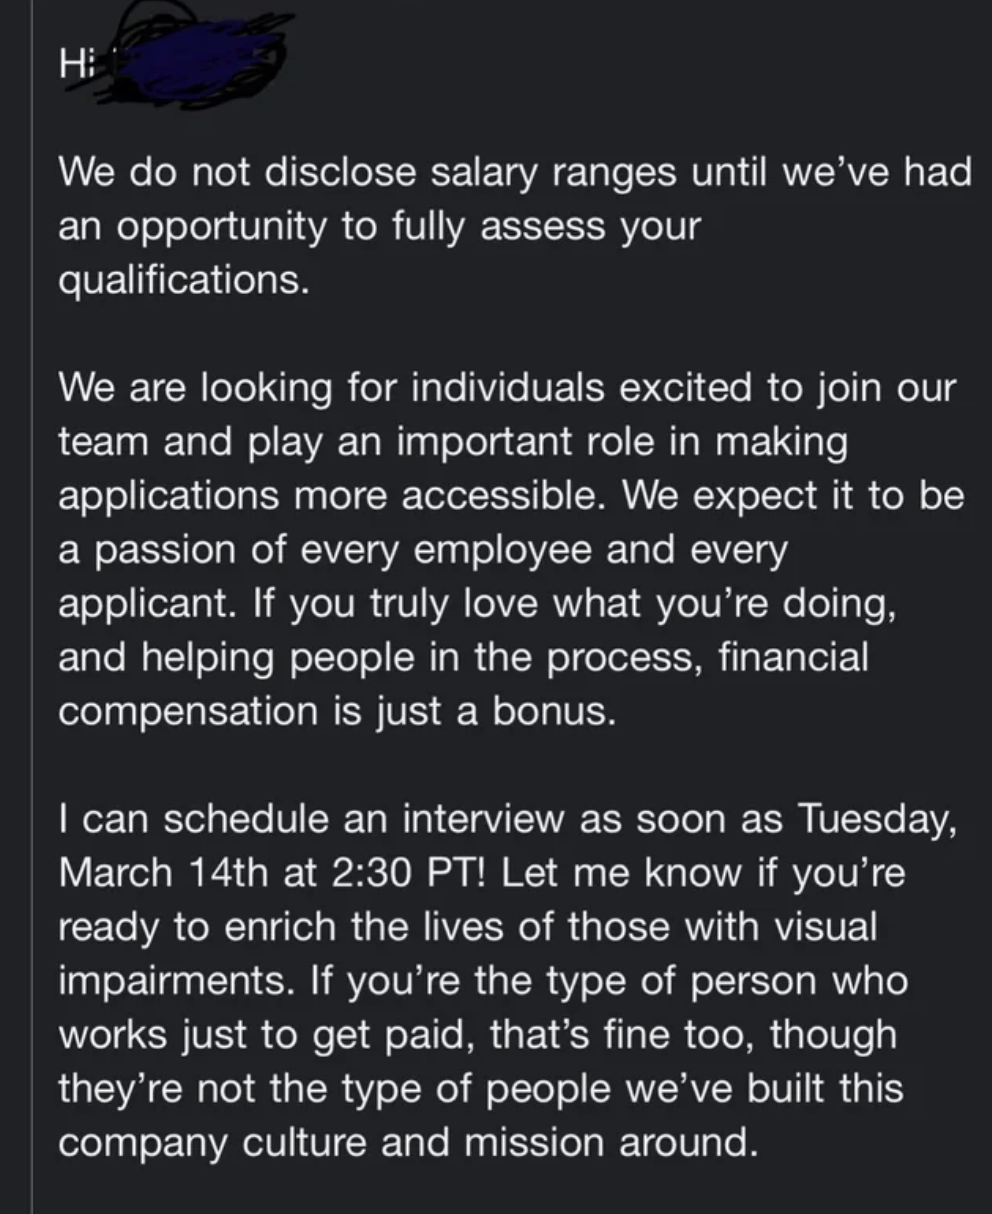 &quot;We do not disclose salary ranges until we&#x27;ve had an opportunity to fully assess your qualifications.&quot;